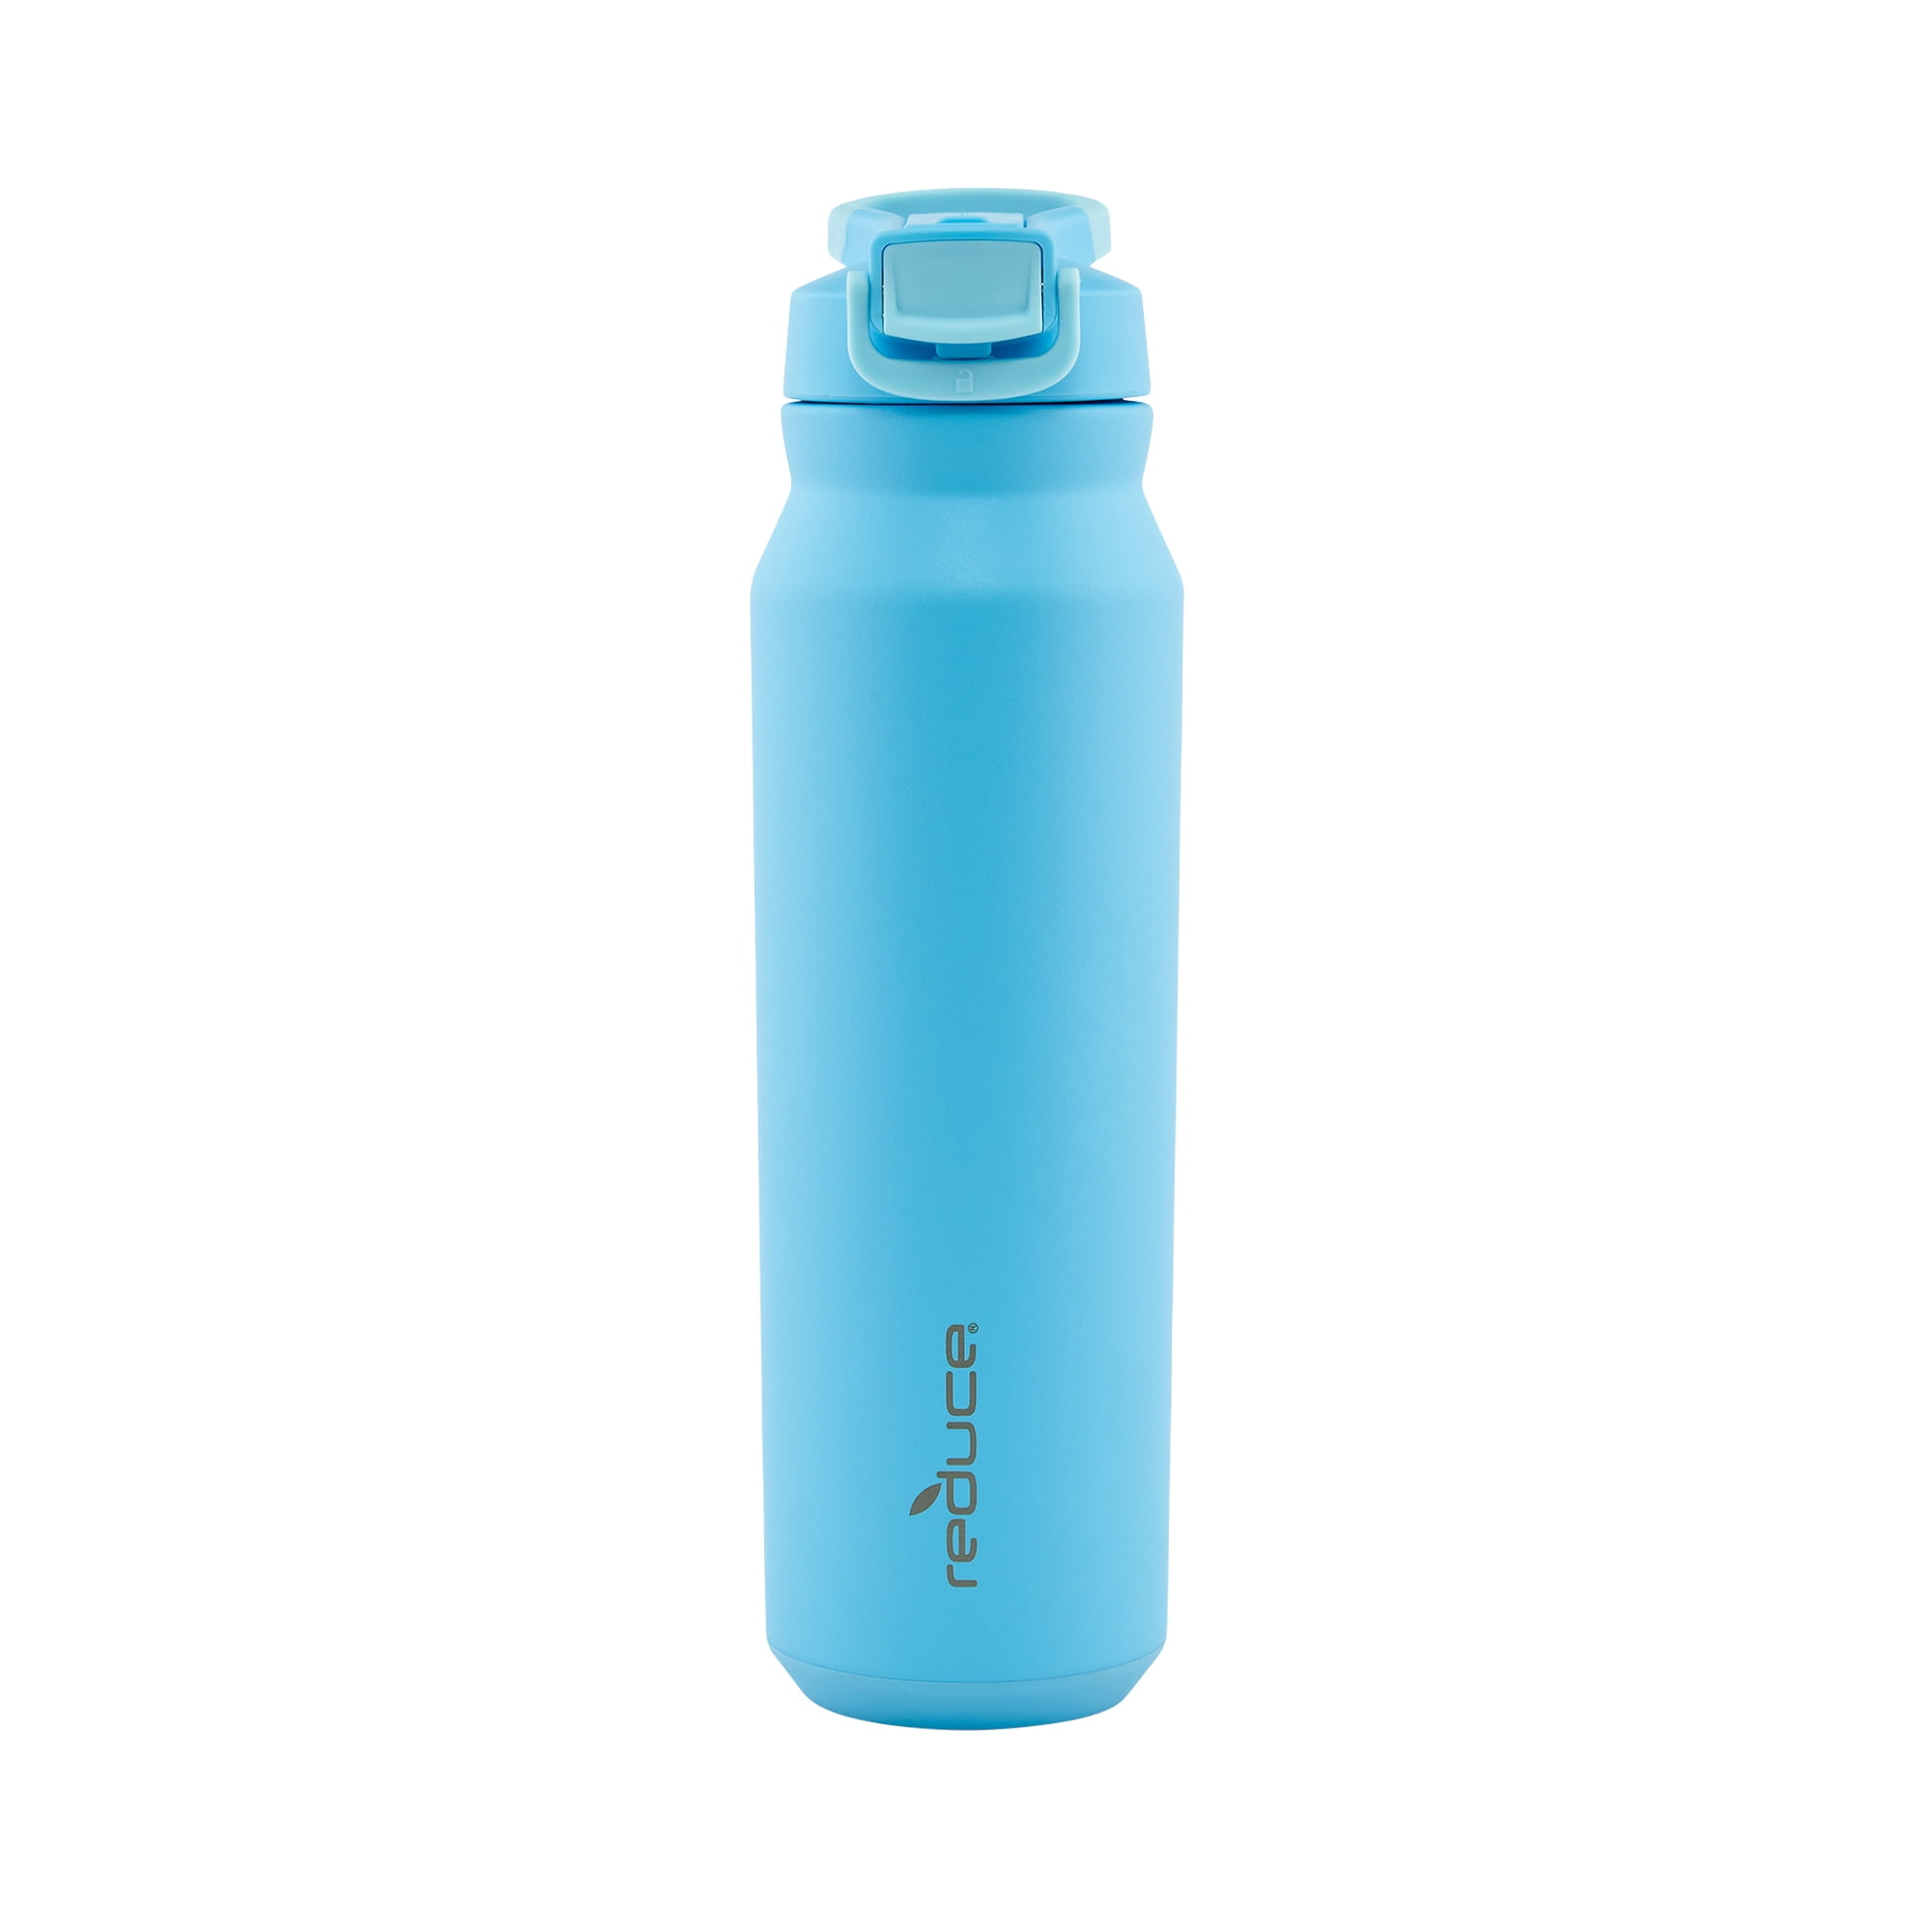 Reduce Vacuum Insulated Stainless Steel Hydrate Pro Water Bottle with Leak- Proof Lid, Grapefruit, 32 oz. 